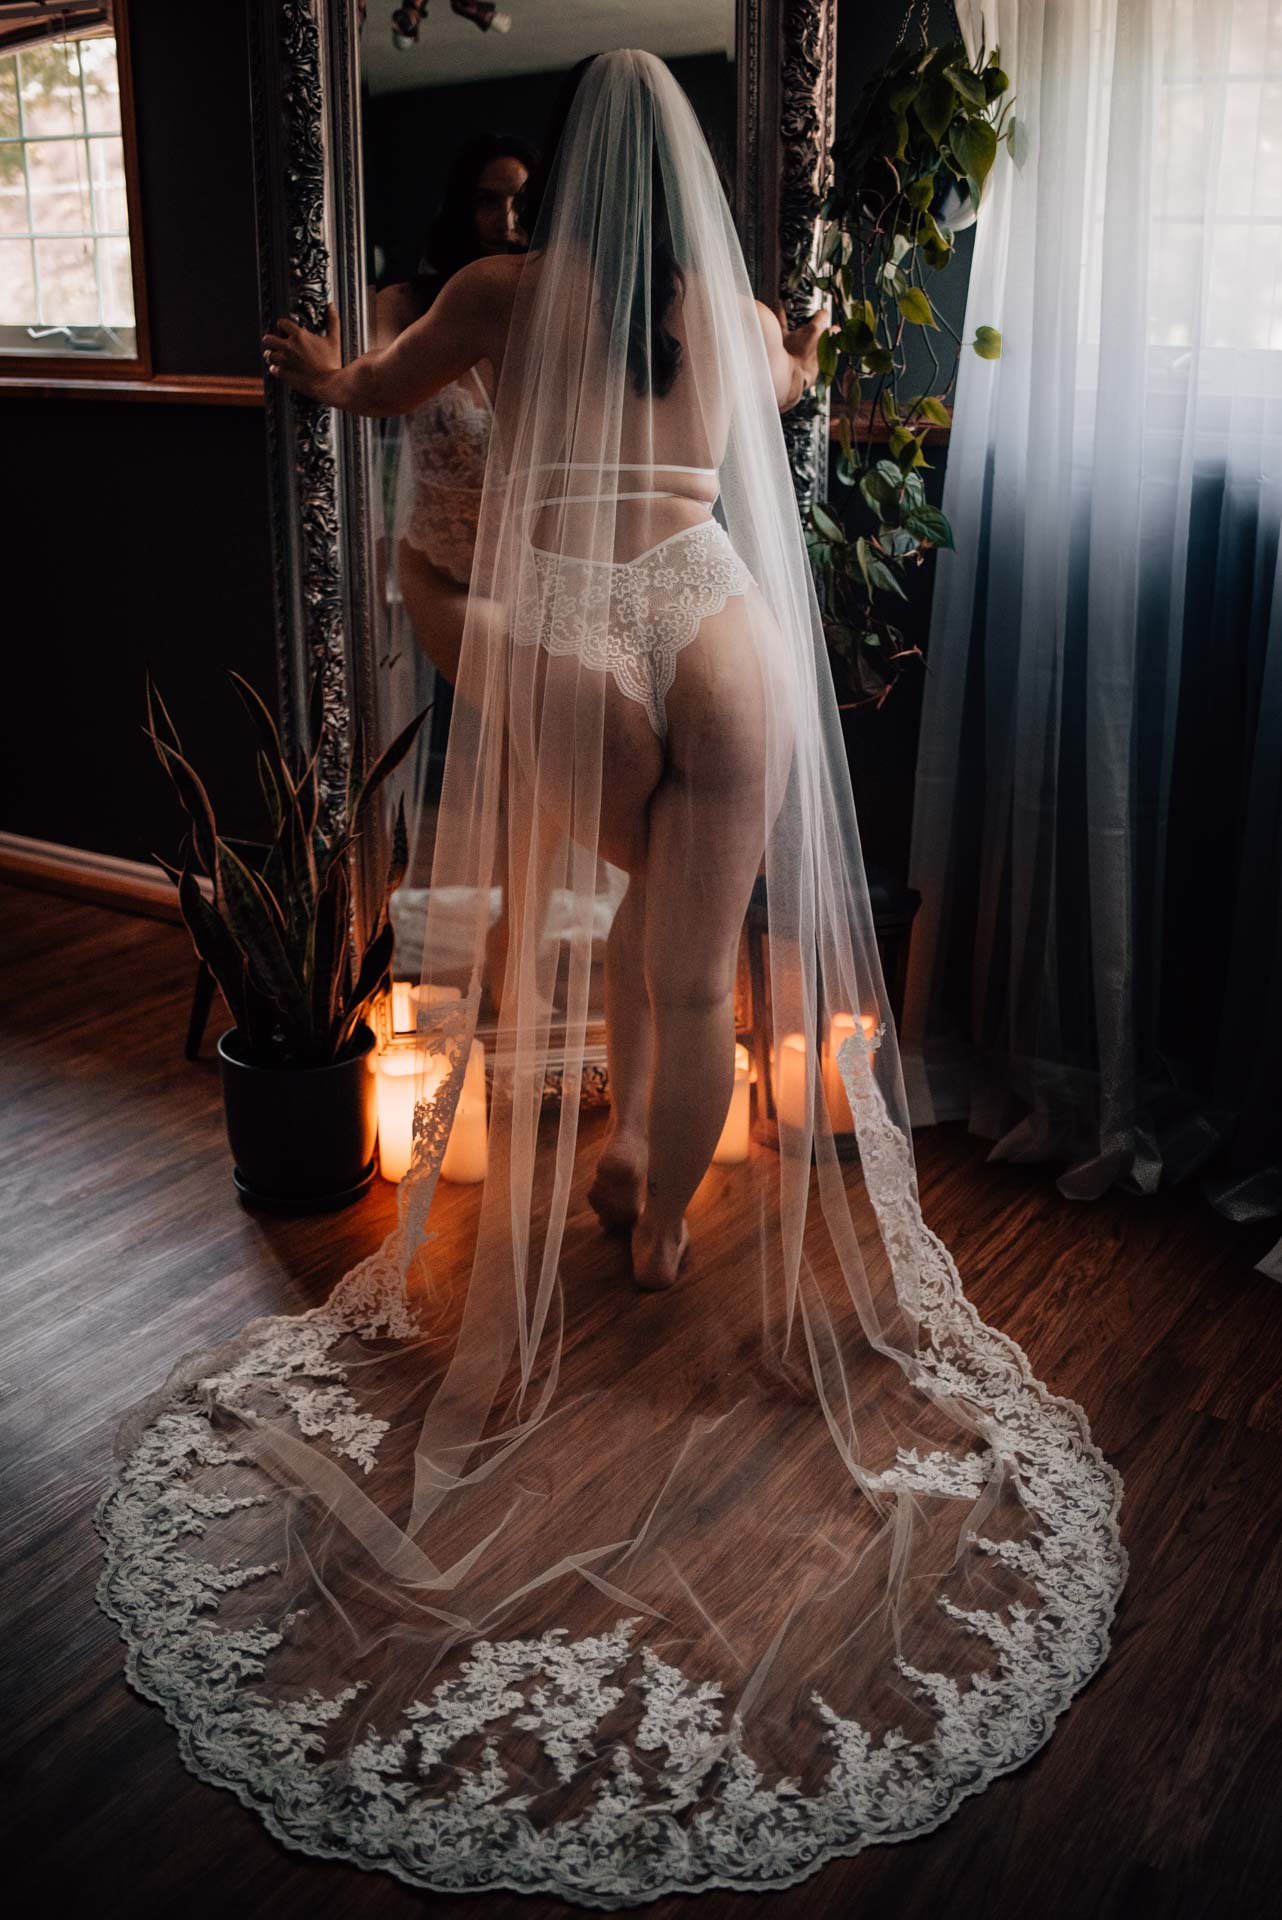 bride wearing cathedral length veil during bridal boudoir session